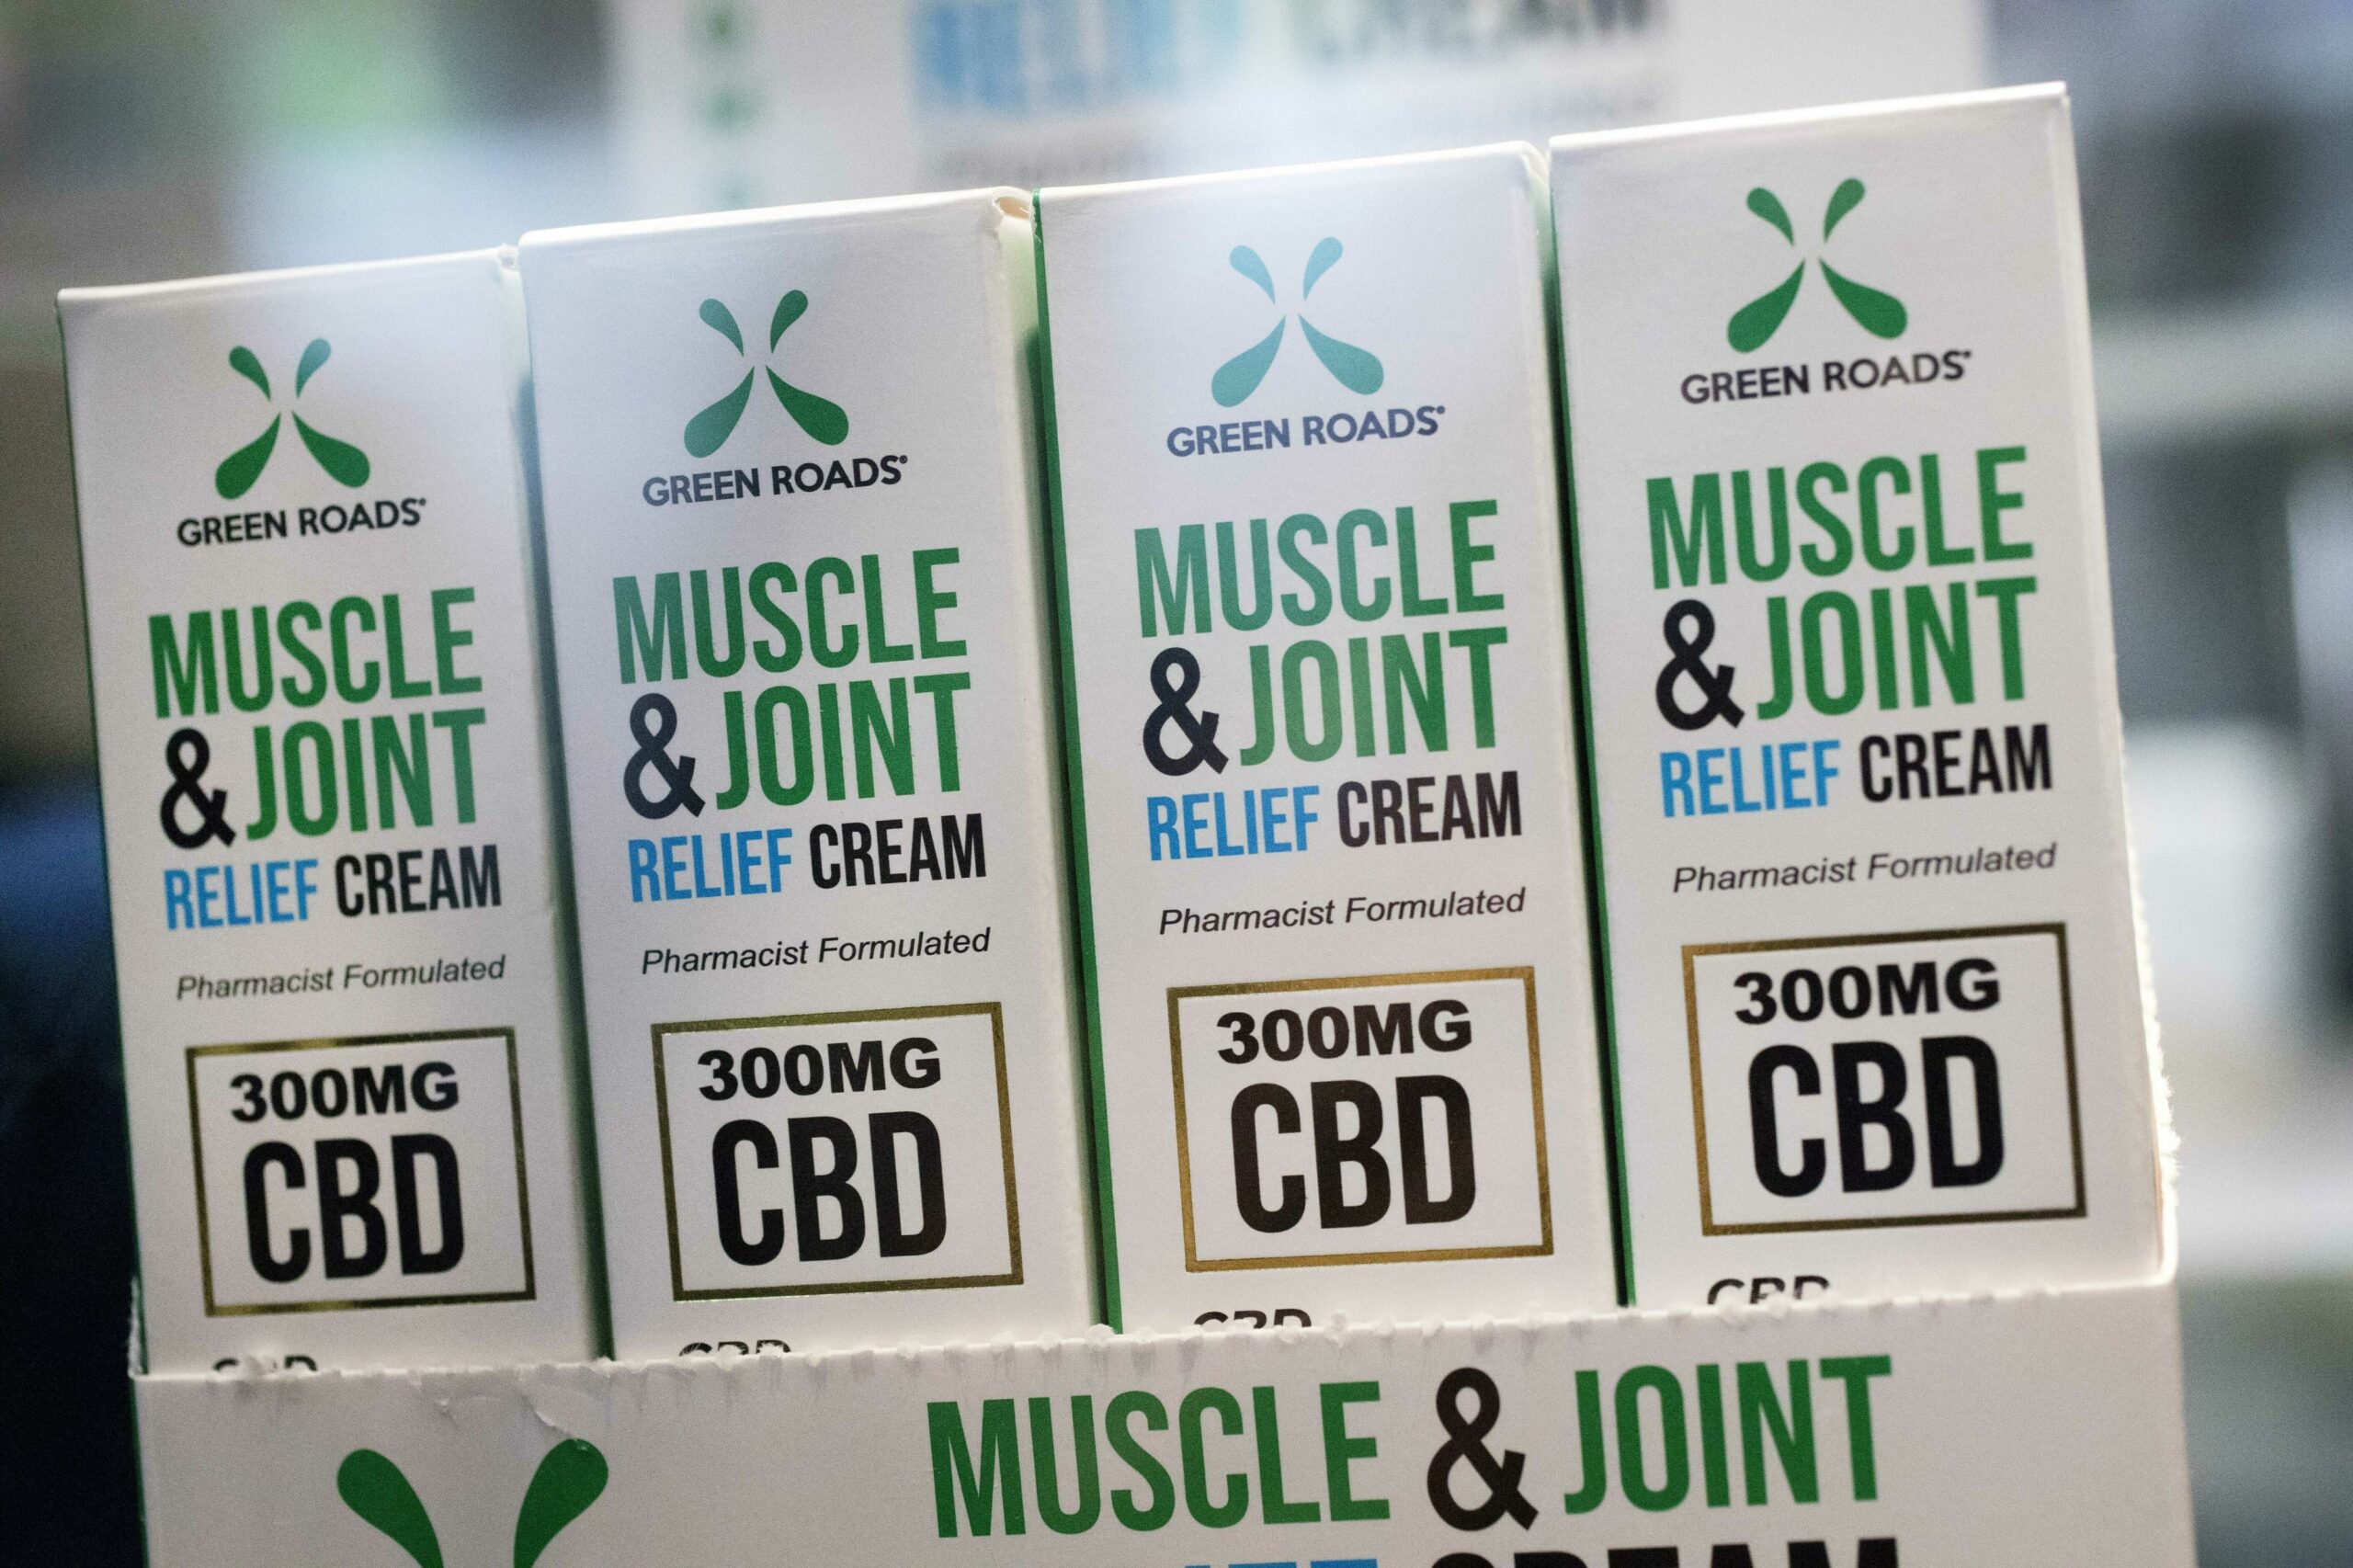 Packages of CBD muscle and joint relief cream on display